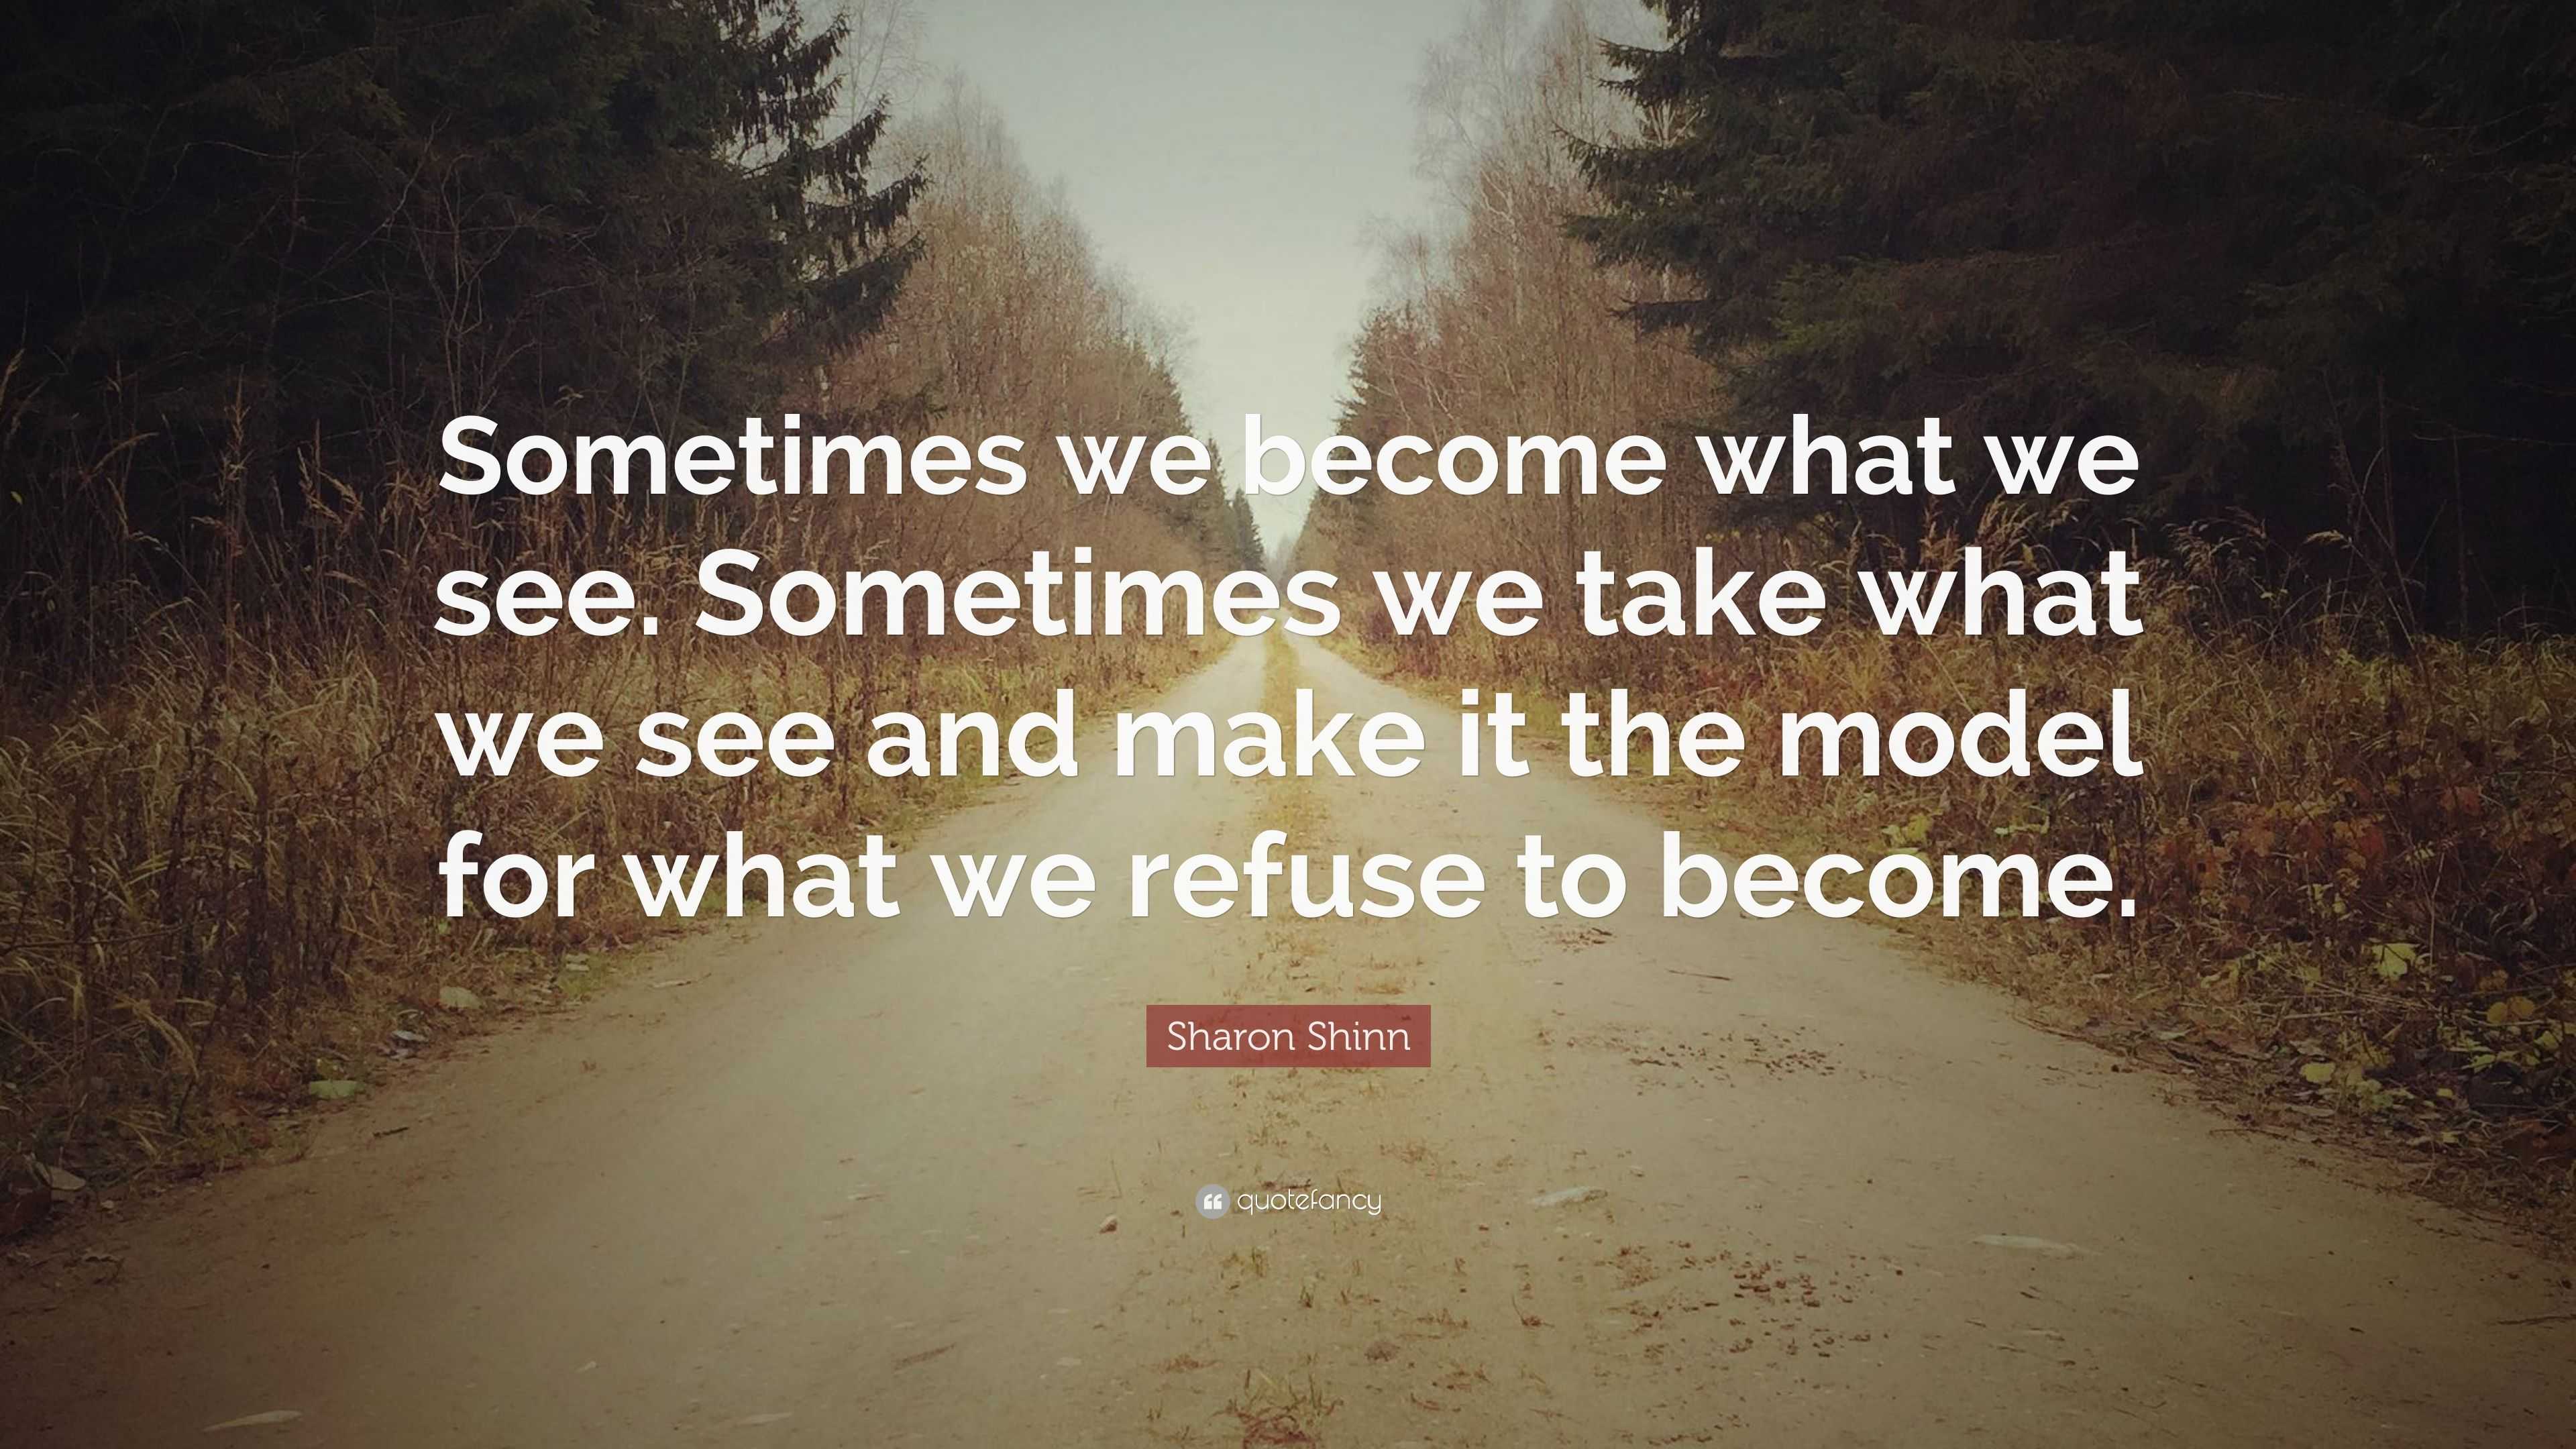 Sharon Shinn Quote: “Sometimes we become what we see. Sometimes we take ...